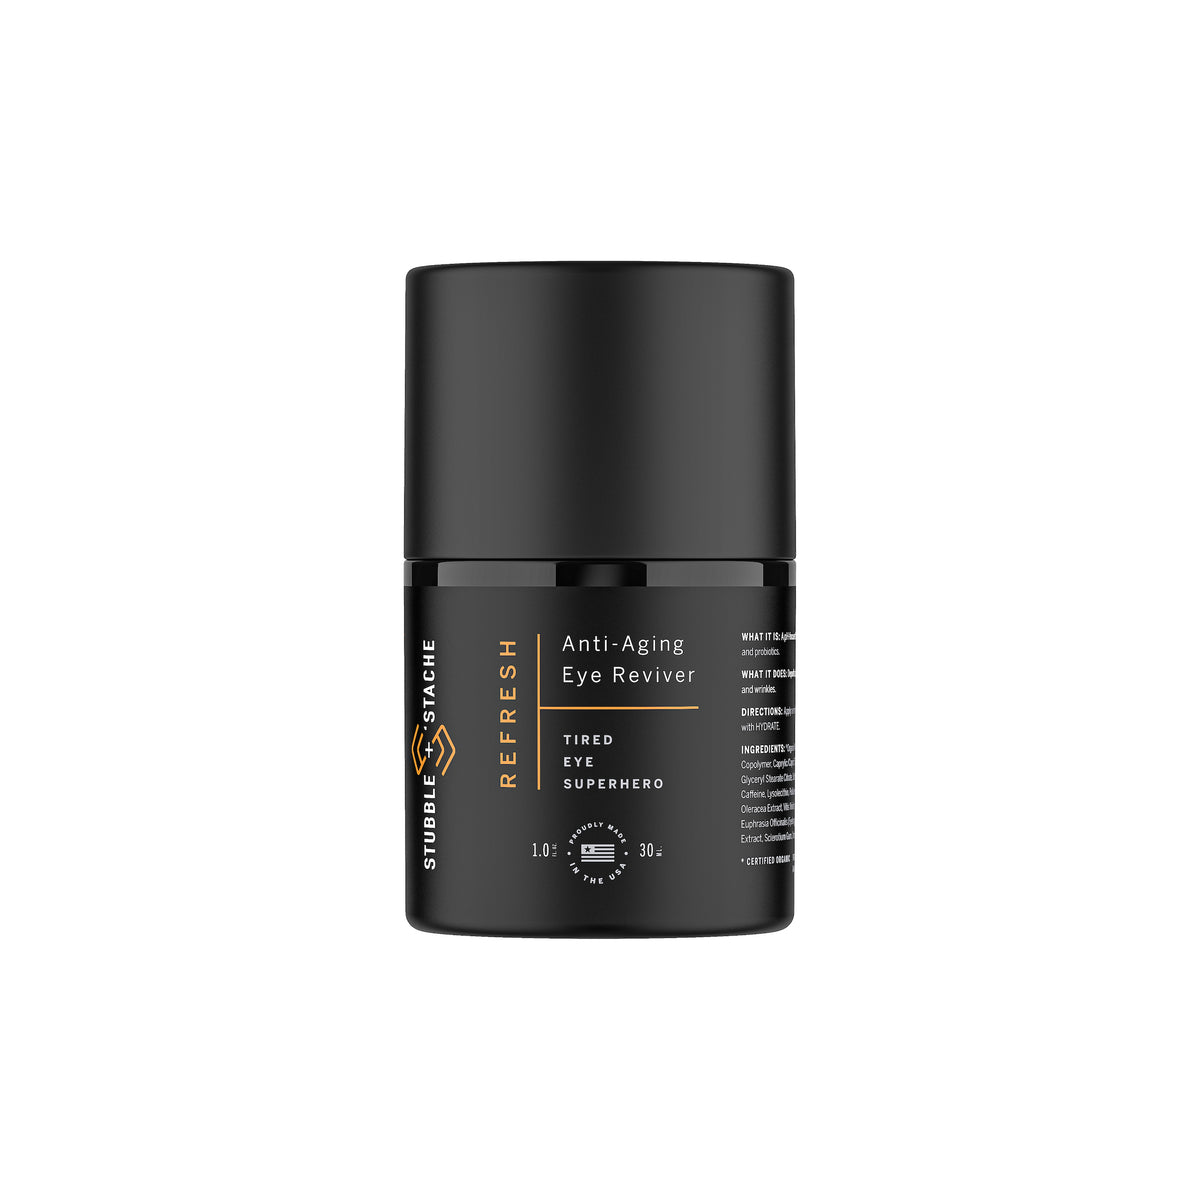 Best eye cream for men. Reduces dark circles, wrinkles and puffiness